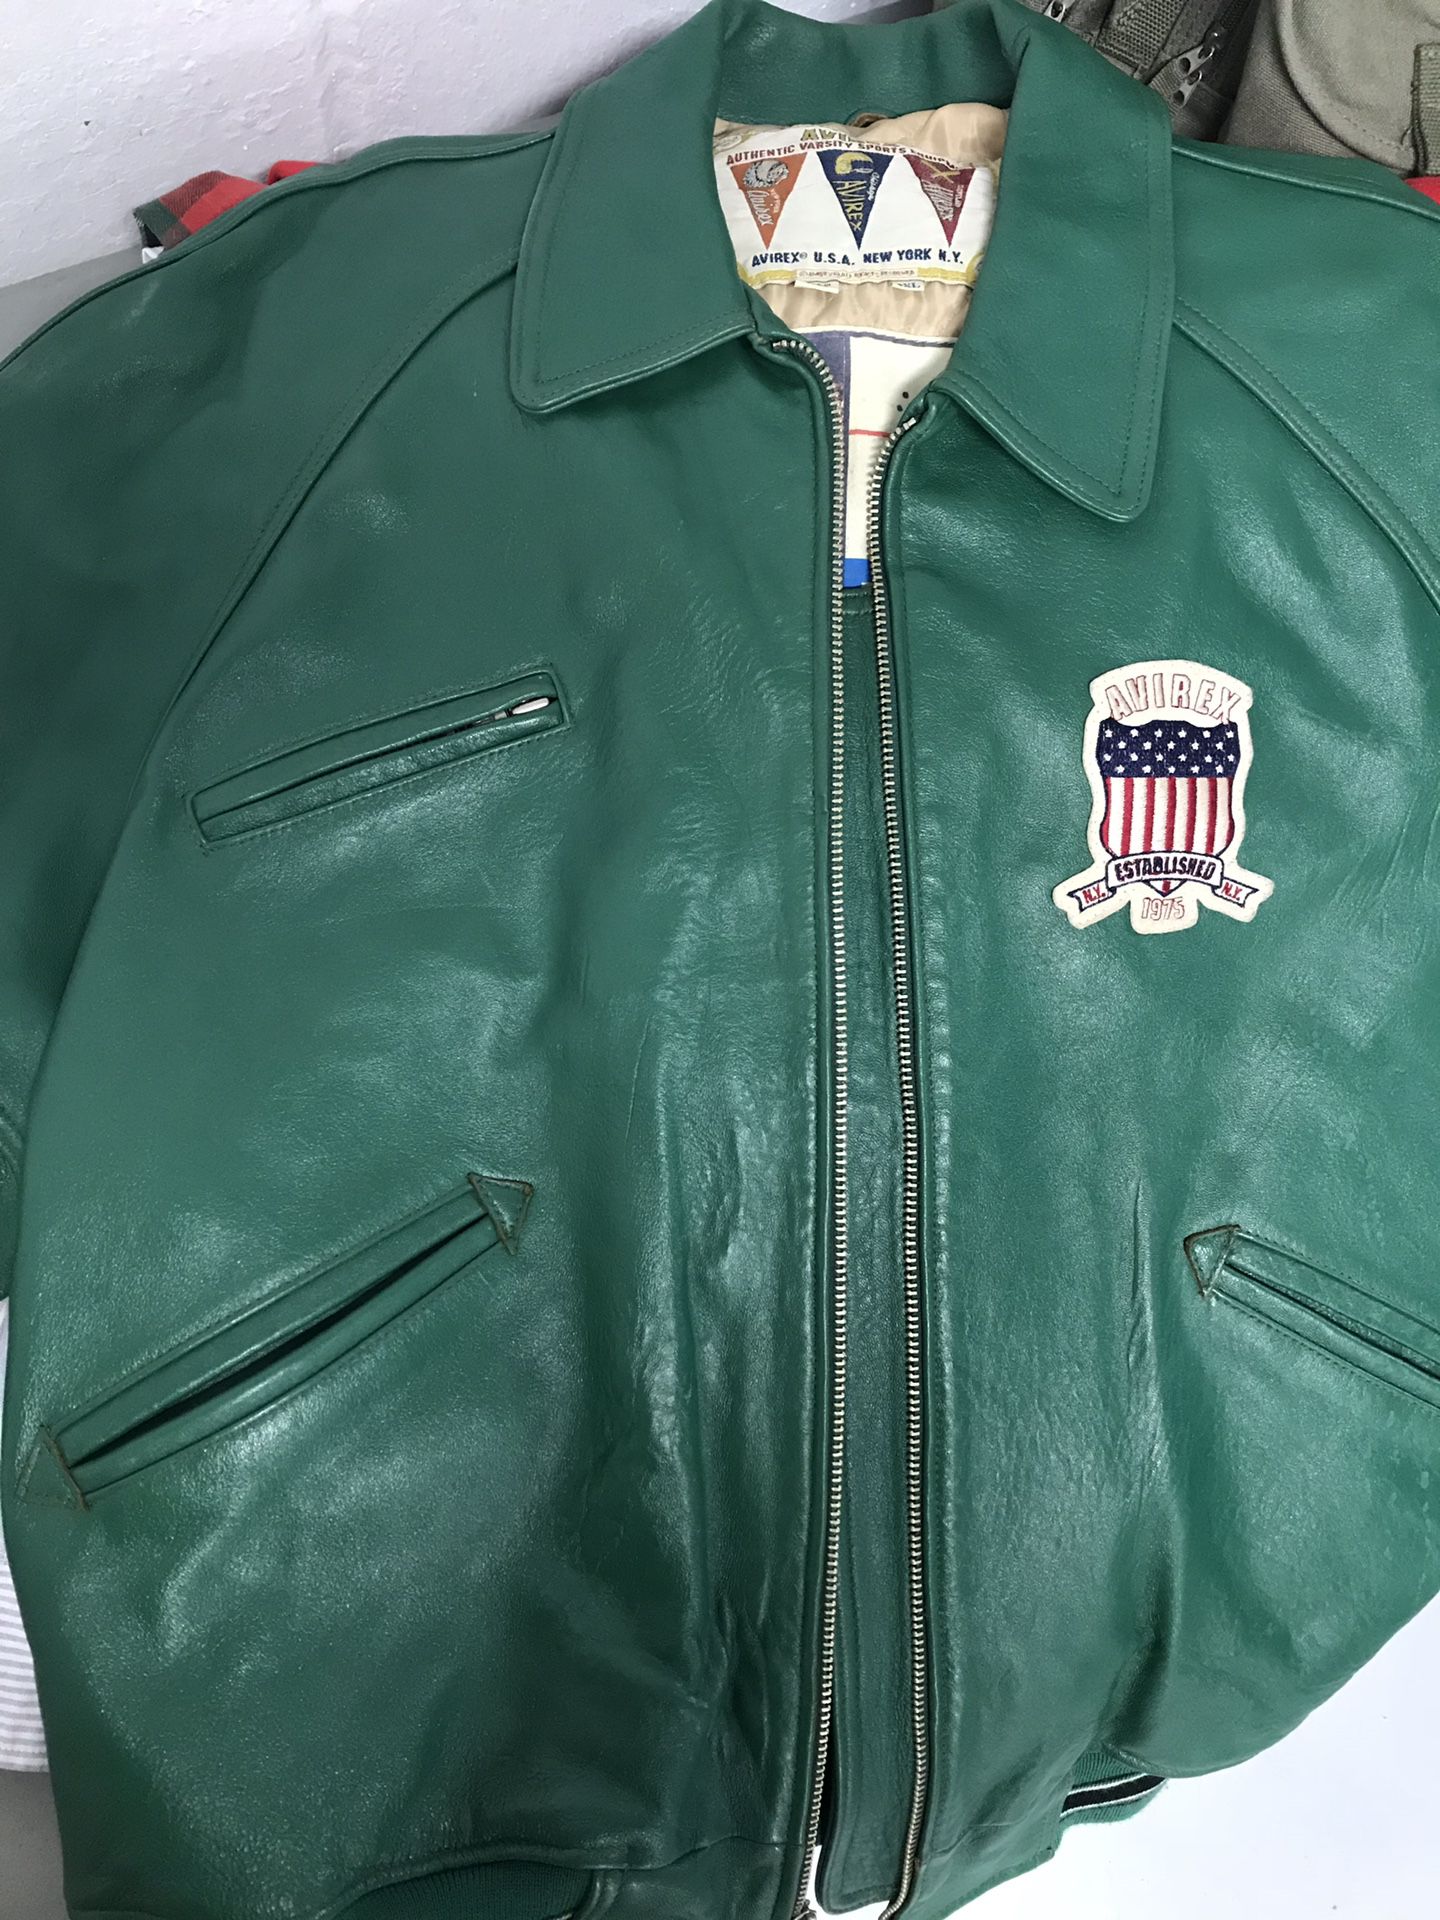 Classic Avirex USA Leather Bomber Jacket for Sale in Lynn, MA